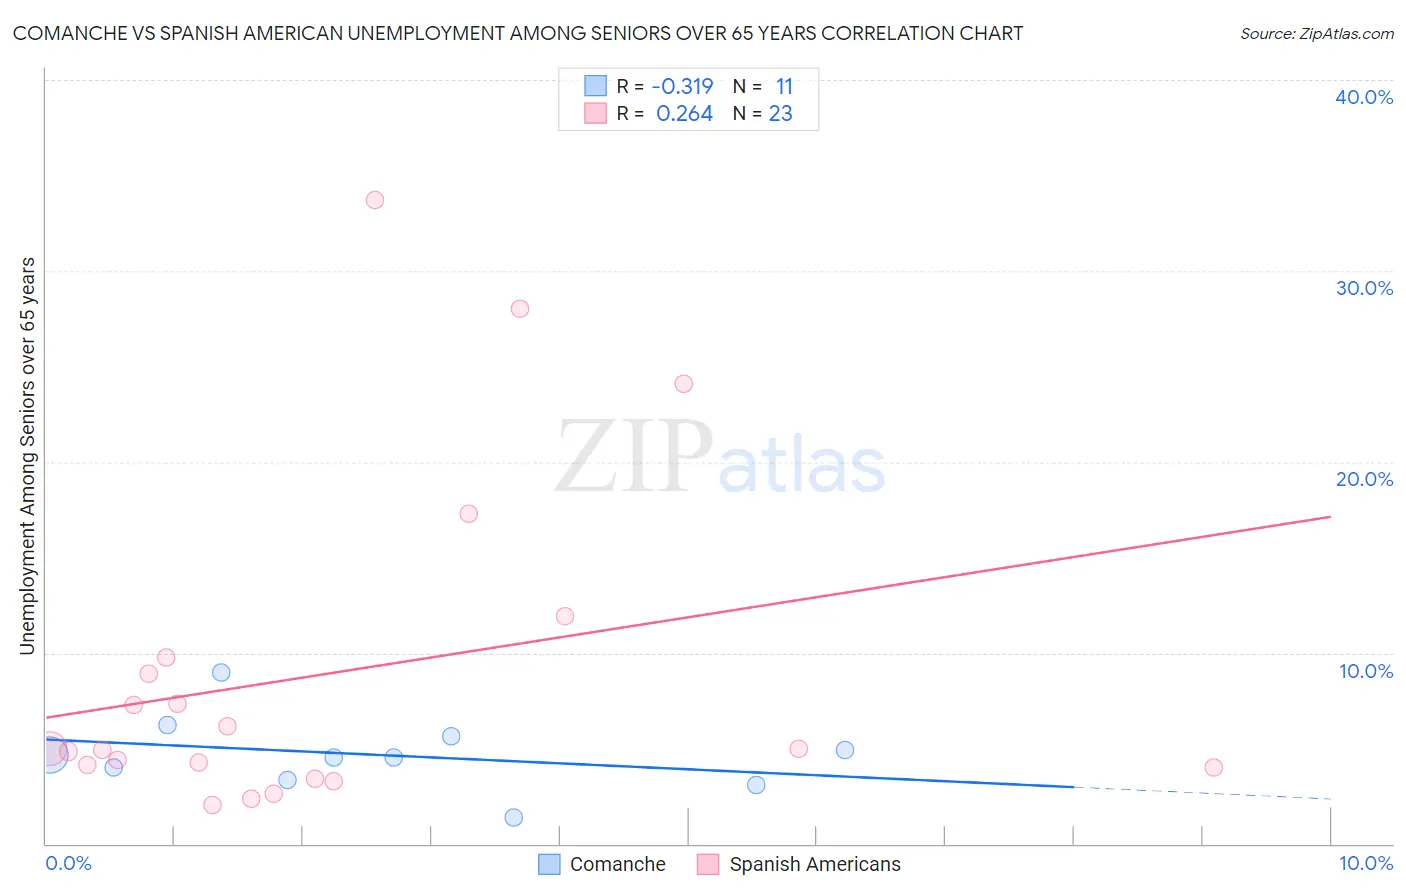 Comanche vs Spanish American Unemployment Among Seniors over 65 years